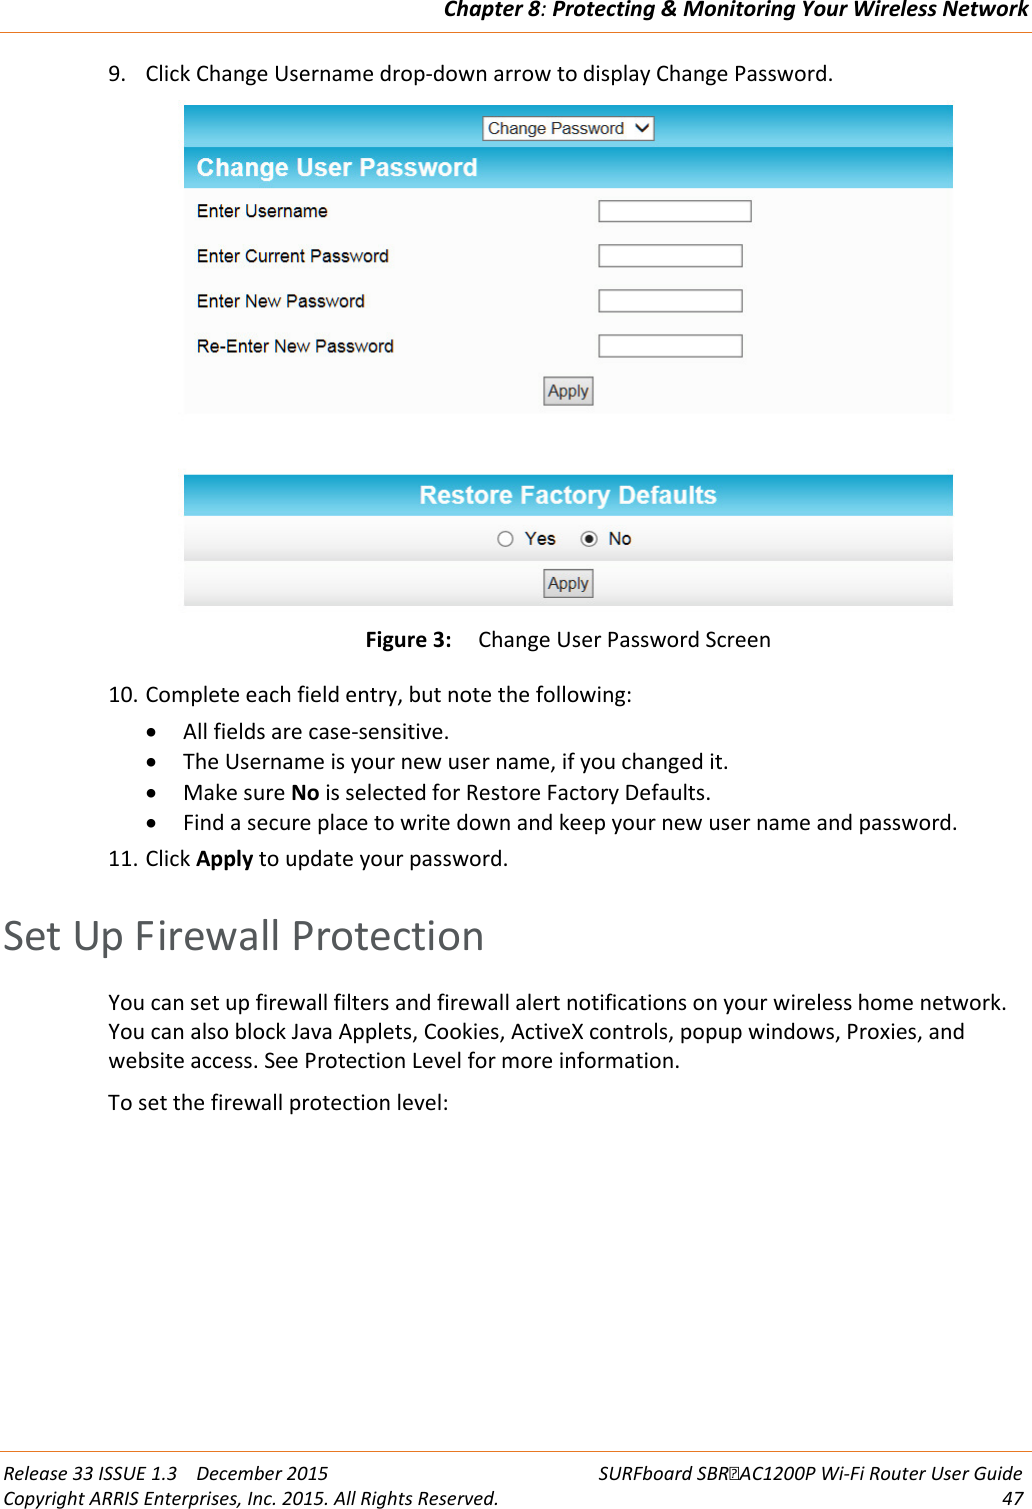 Chapter 8: Protecting &amp; Monitoring Your Wireless Network  Release 33 ISSUE 1.3    December 2015 SURFboard SBRAC1200P Wi-Fi Router User Guide Copyright ARRIS Enterprises, Inc. 2015. All Rights Reserved. 47  9. Click Change Username drop-down arrow to display Change Password.  Figure 3: Change User Password Screen 10. Complete each field entry, but note the following: • All fields are case-sensitive. • The Username is your new user name, if you changed it. • Make sure No is selected for Restore Factory Defaults. • Find a secure place to write down and keep your new user name and password. 11. Click Apply to update your password.   Set Up Firewall Protection You can set up firewall filters and firewall alert notifications on your wireless home network. You can also block Java Applets, Cookies, ActiveX controls, popup windows, Proxies, and website access. See Protection Level for more information. To set the firewall protection level: 